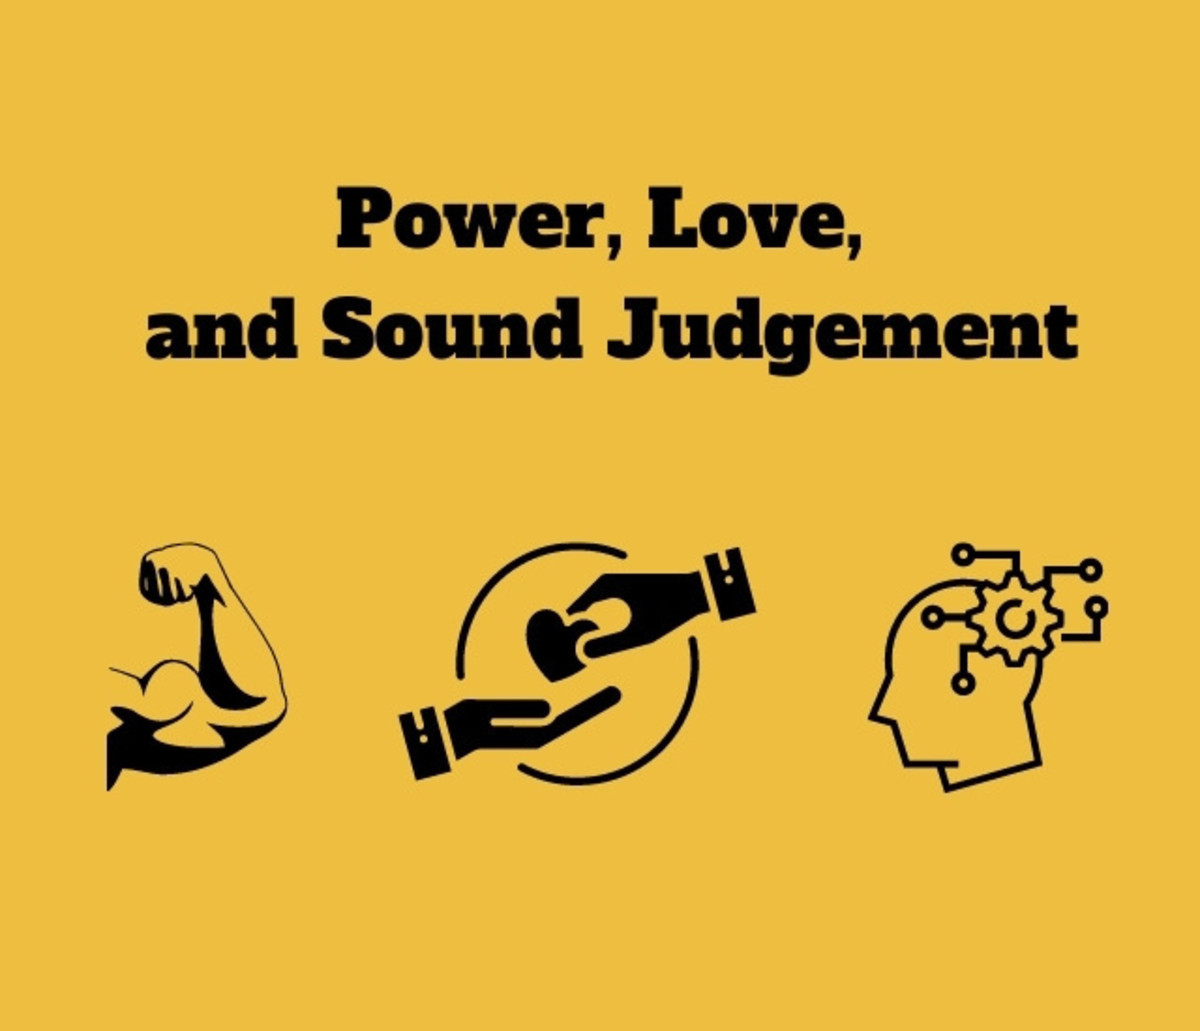 Power, Love, and Good Judgement